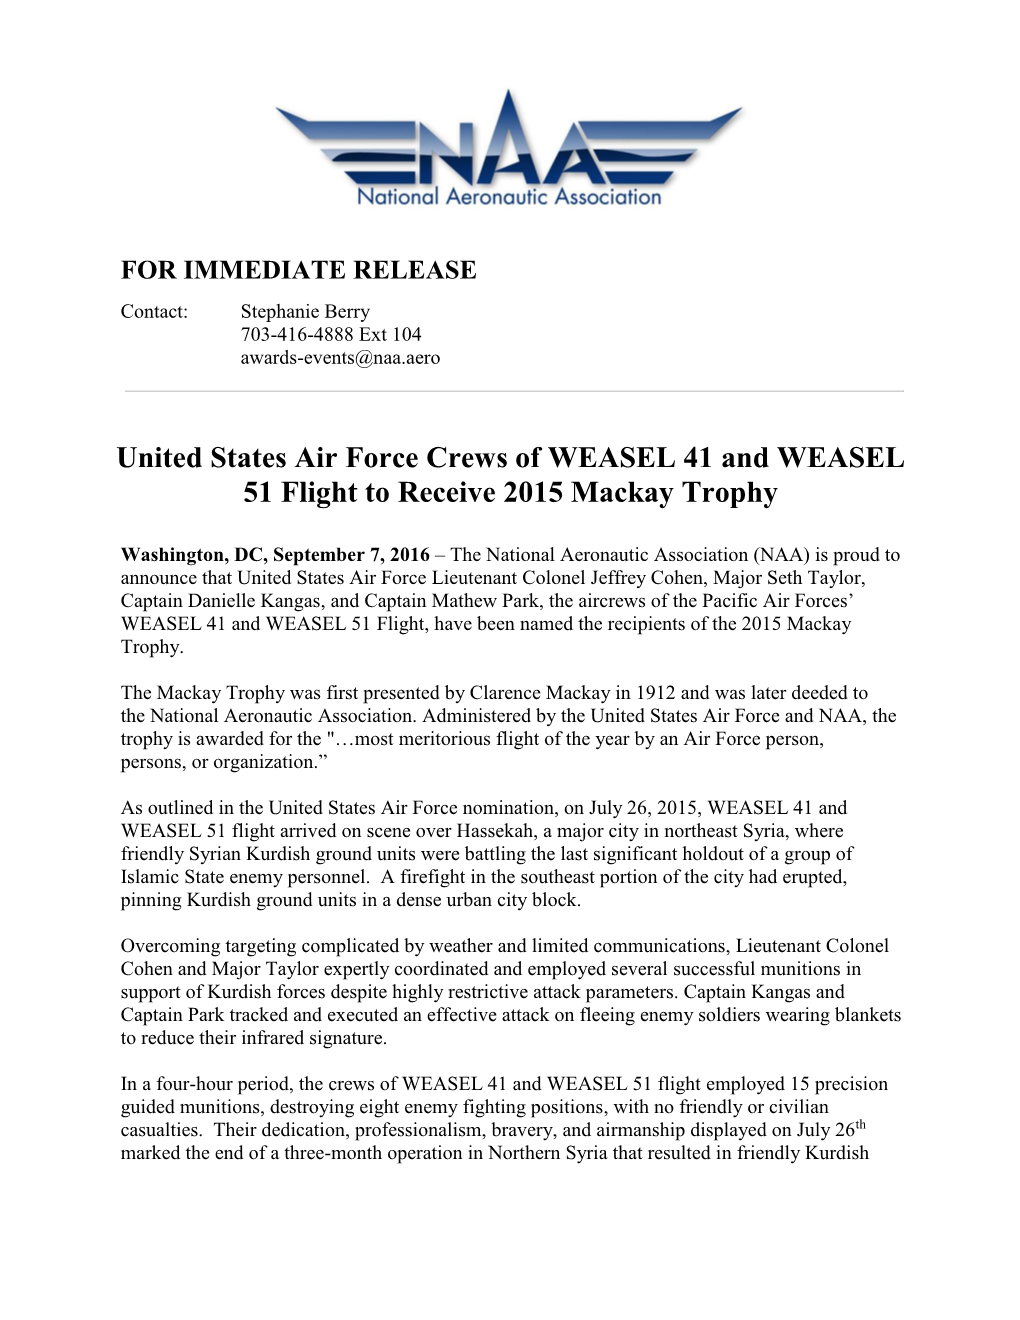 United States Air Force Crews of WEASEL 41 and WEASEL 51 Flight to Receive 2015 Mackay Trophy